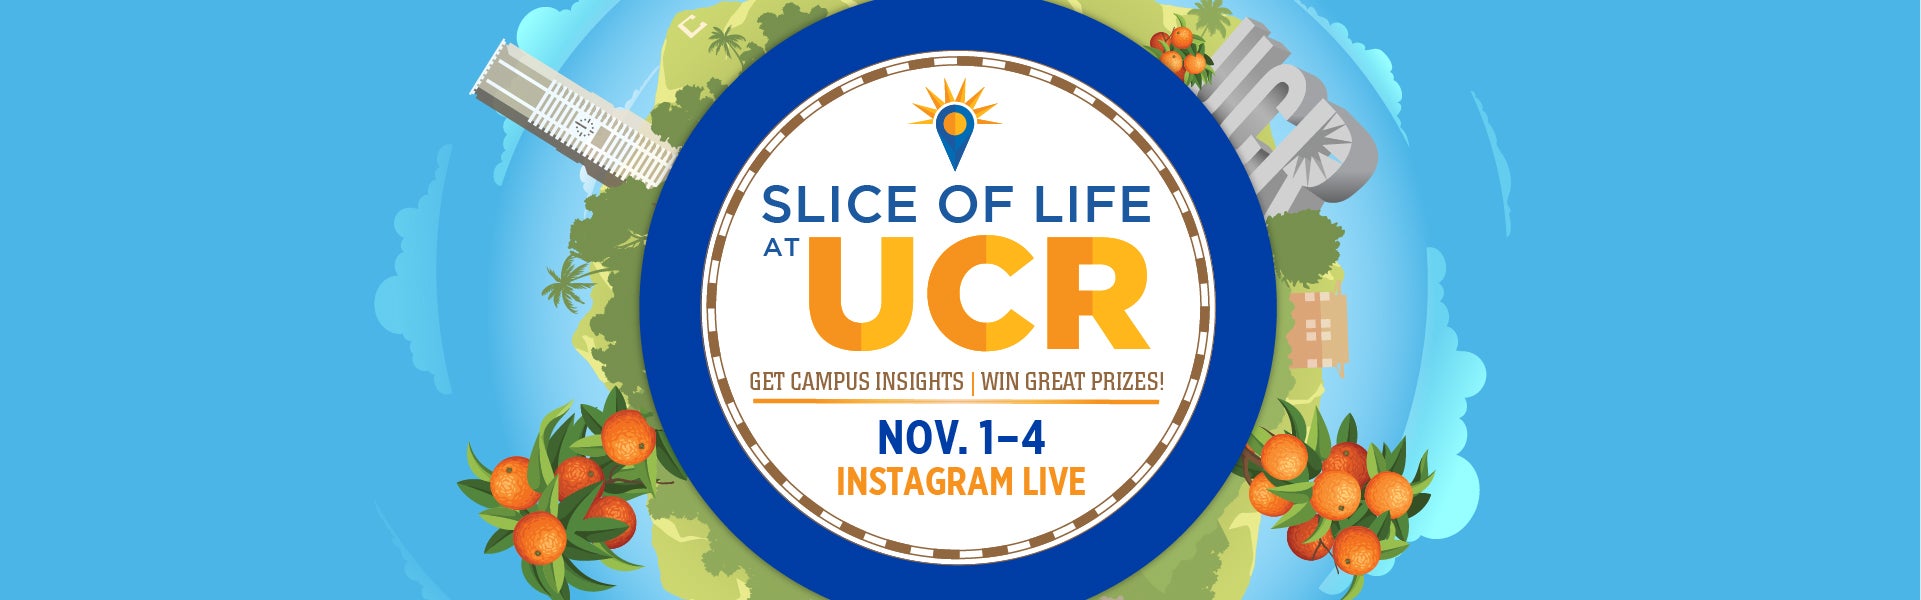 uc riverside slice of life ucr fall preview slide 0